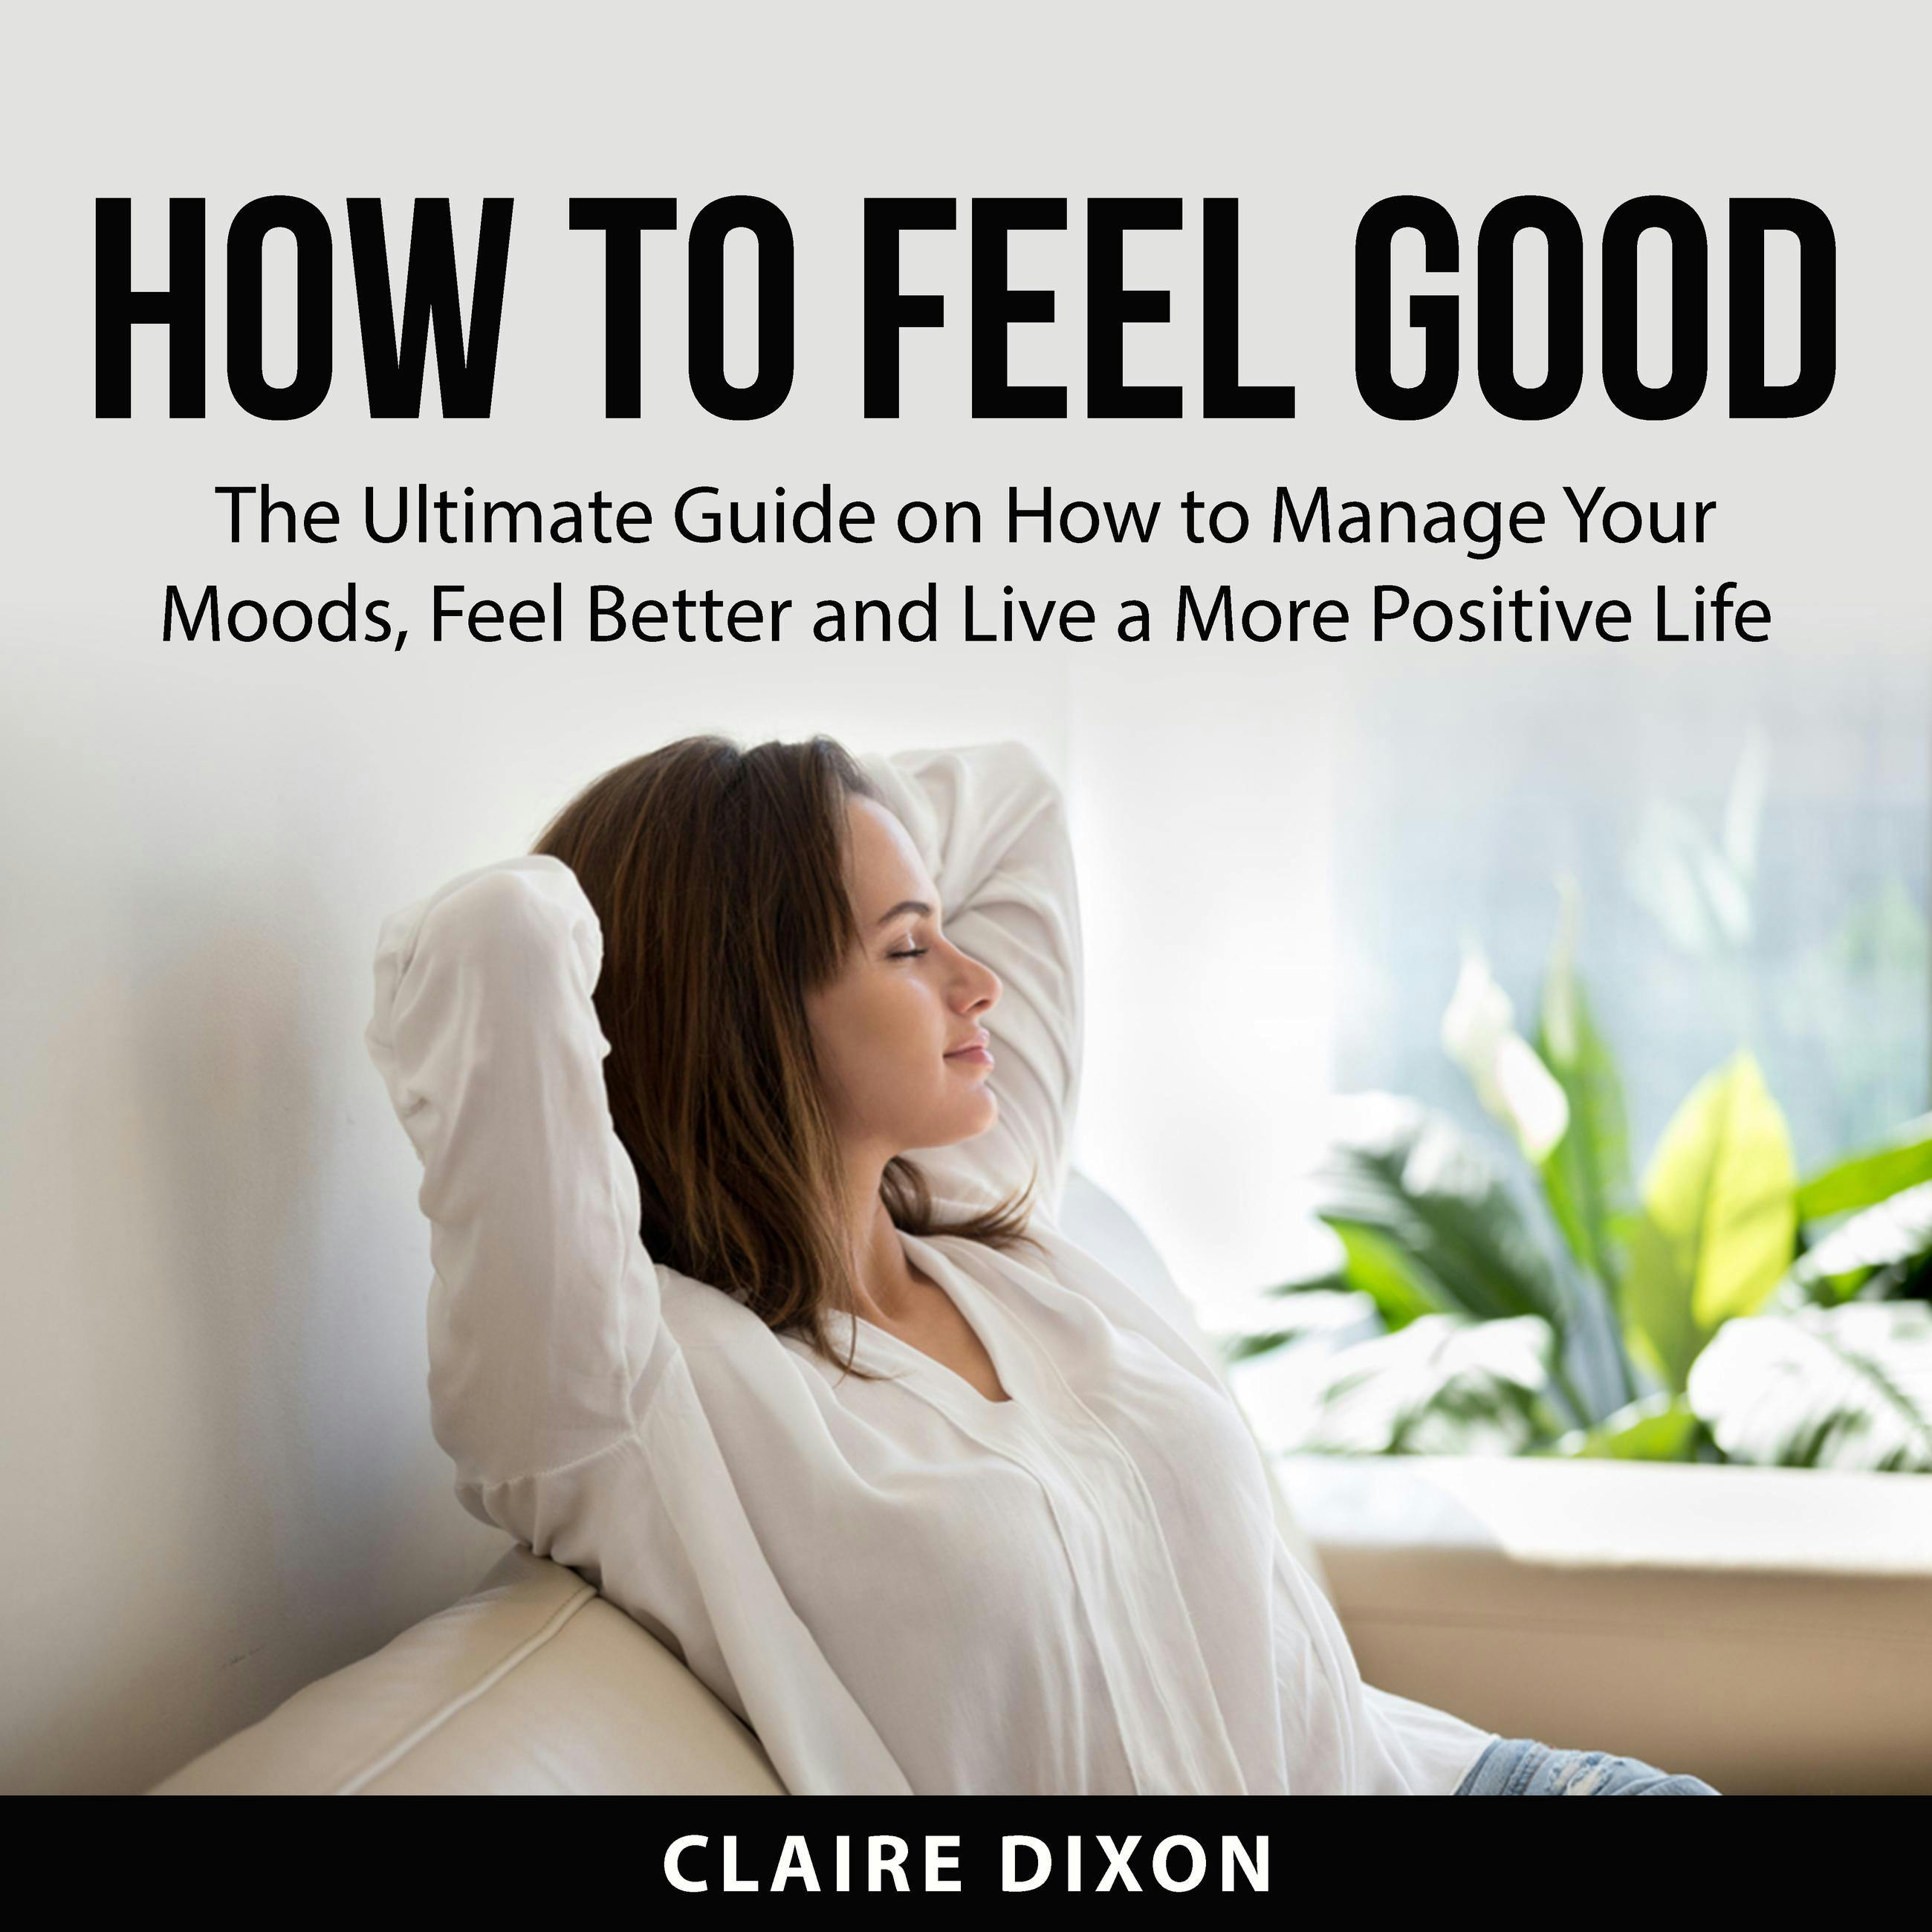 How to Feel Good: The Ultimate Guide on How to Manage Your Moods, Feel Better and Live a More Positive Life - undefined